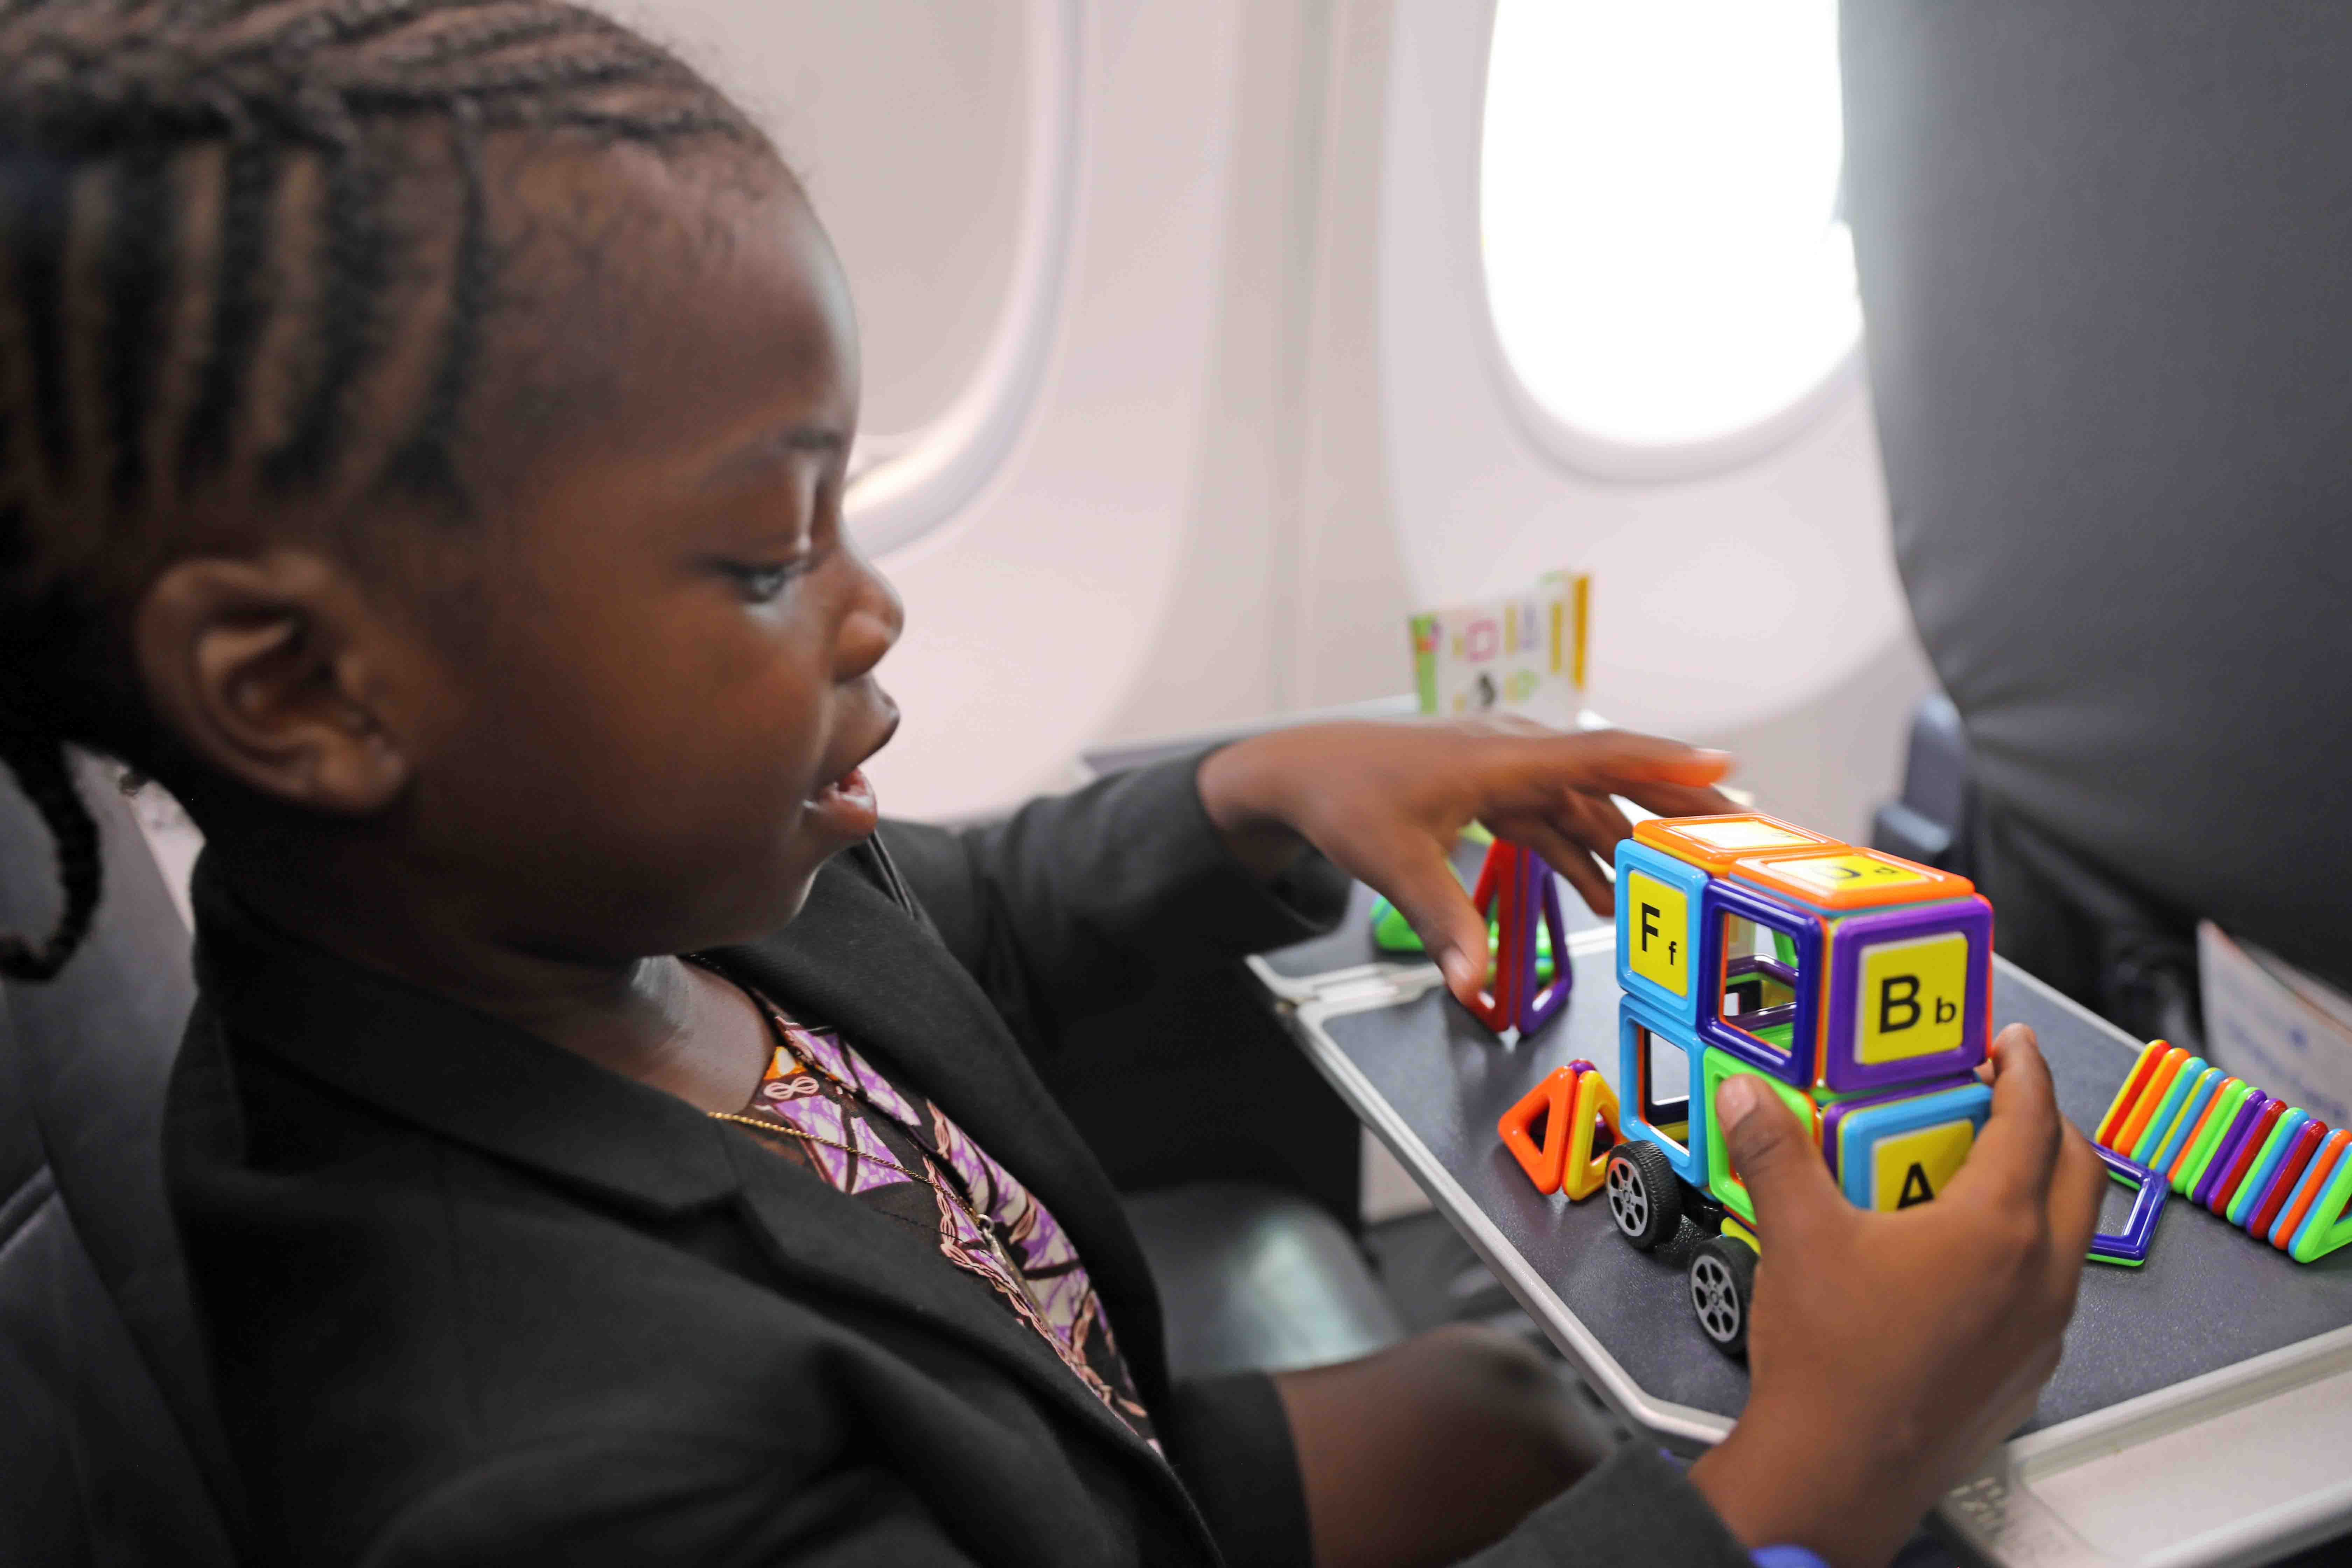 Airplane Activities for Toddlers: How to Entertain the Kids during a Flight